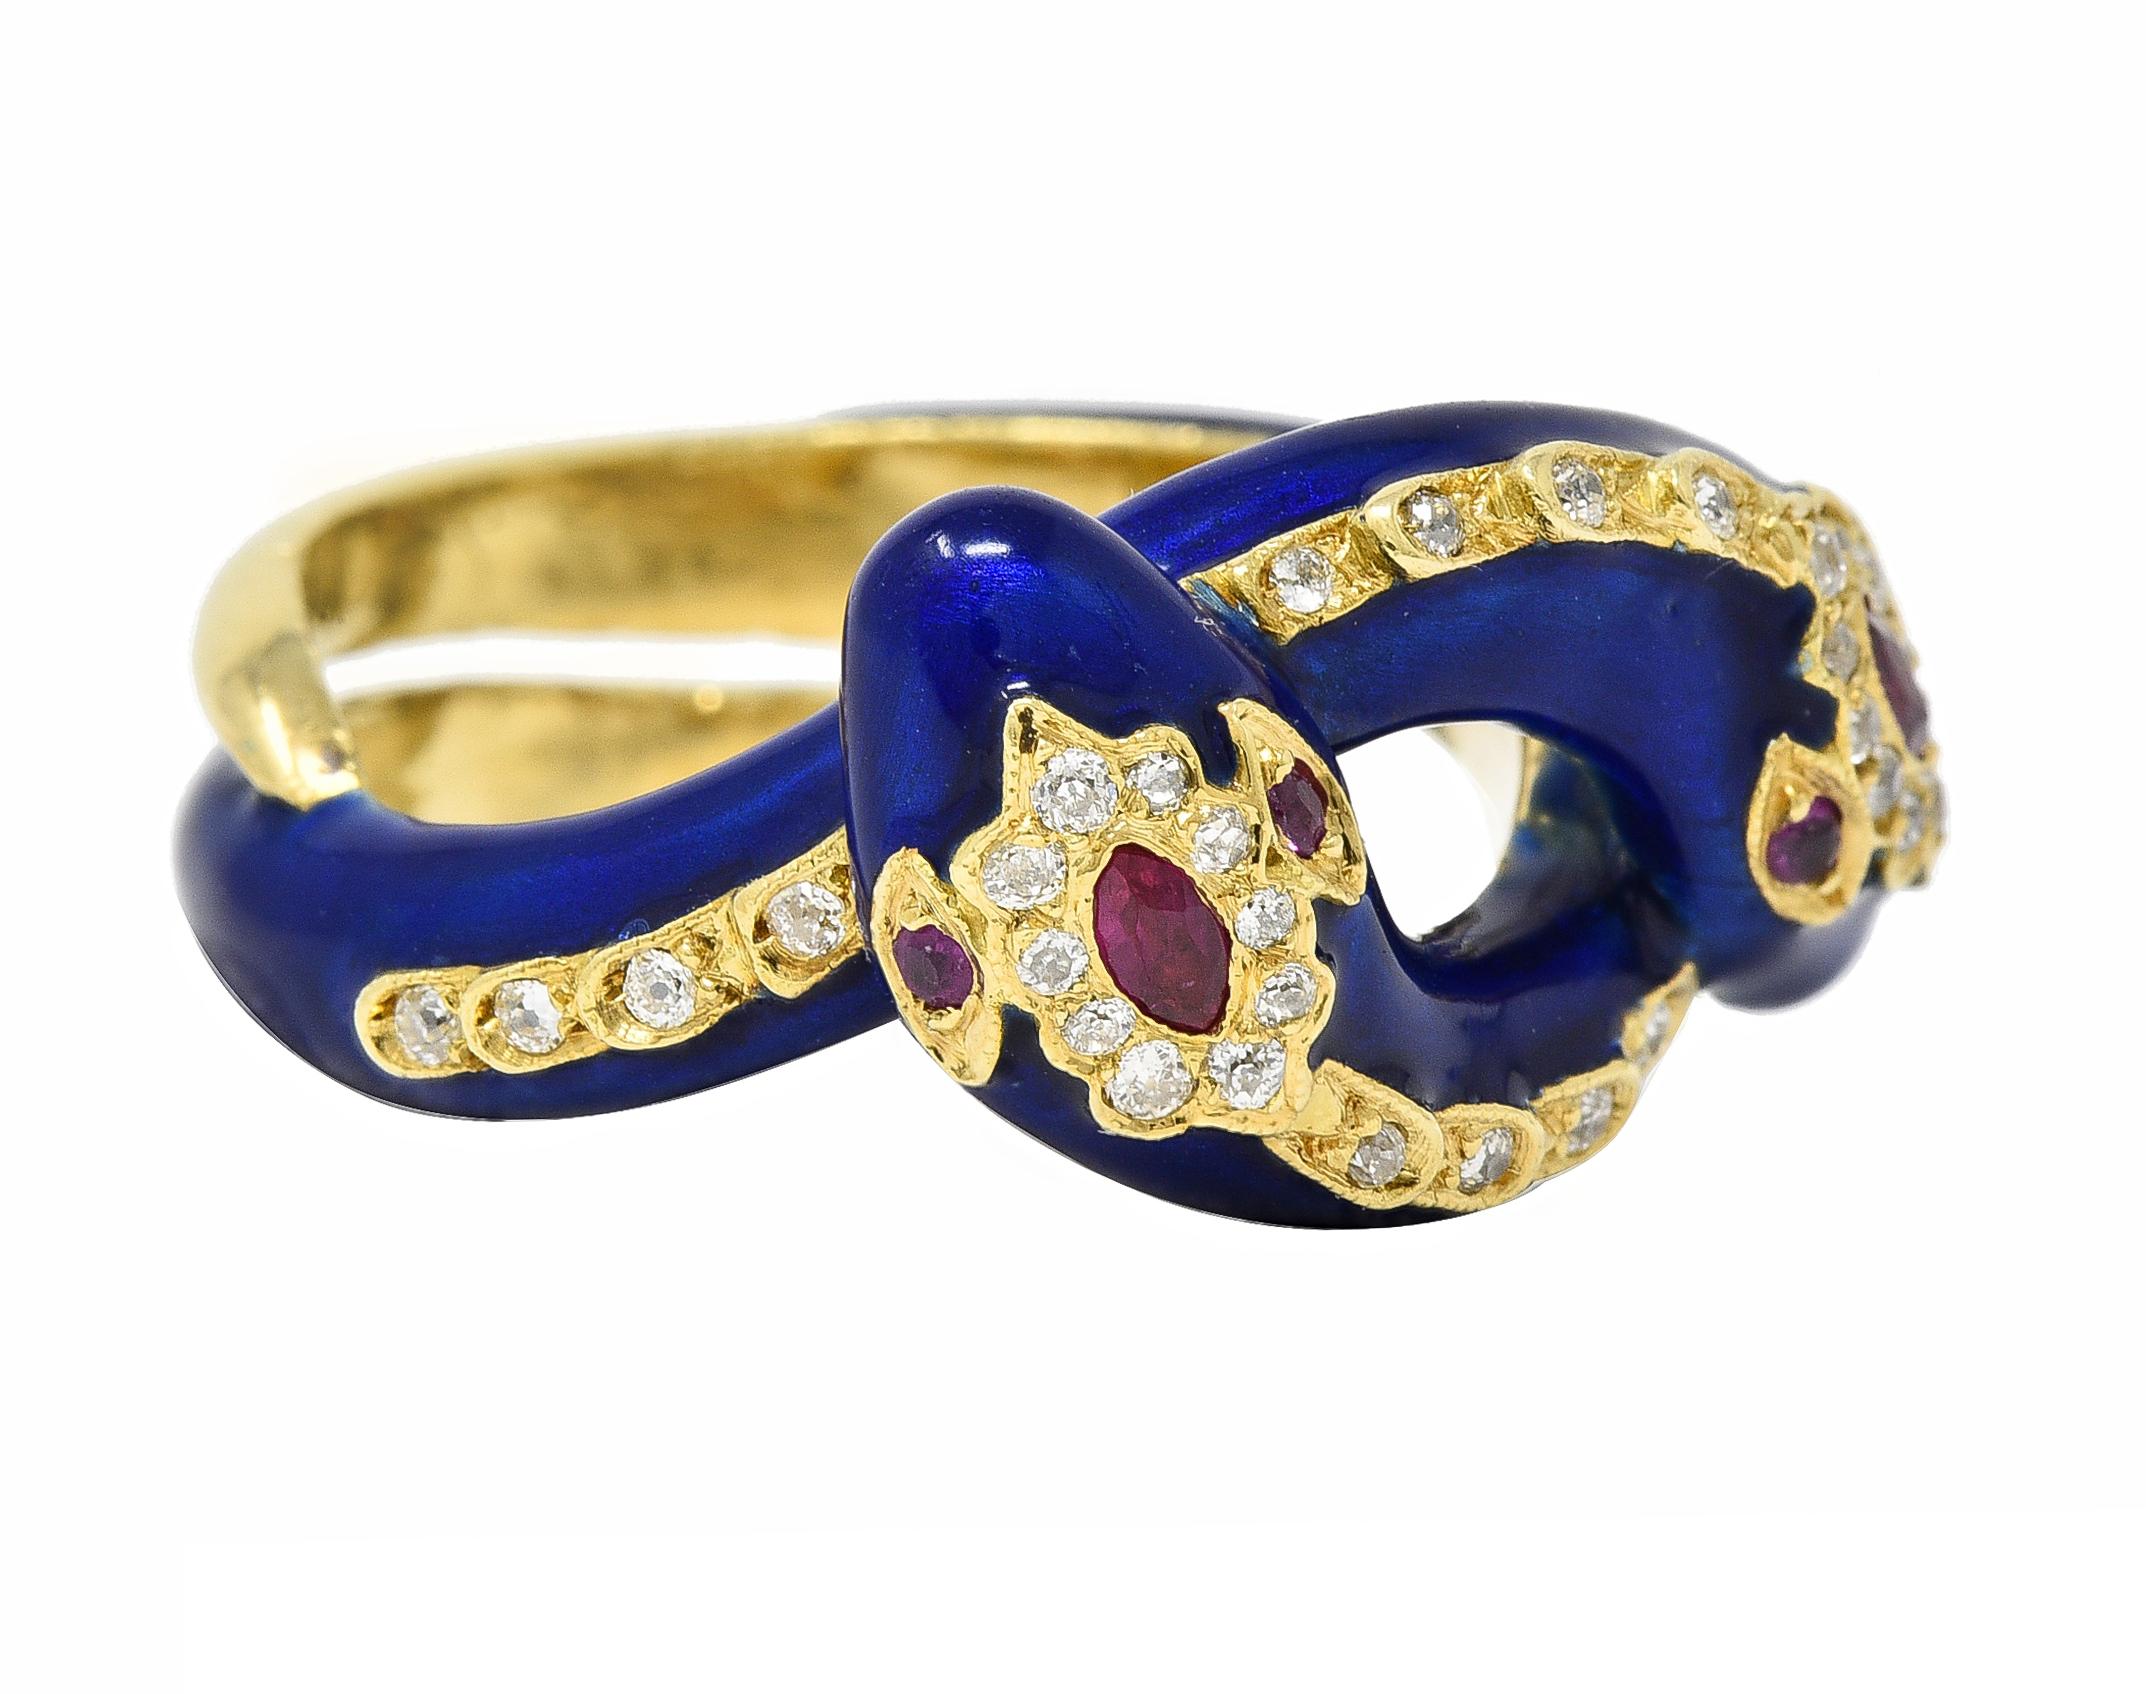 Designed as two entwined gold snakes with glossed enamel bodies
Transparent medium ultramarine blue in color - minimal loss
Centering navette-shaped rubies in heads and round cut ruby eyes
Weighing approximately 0.14 carat total - transparent bright